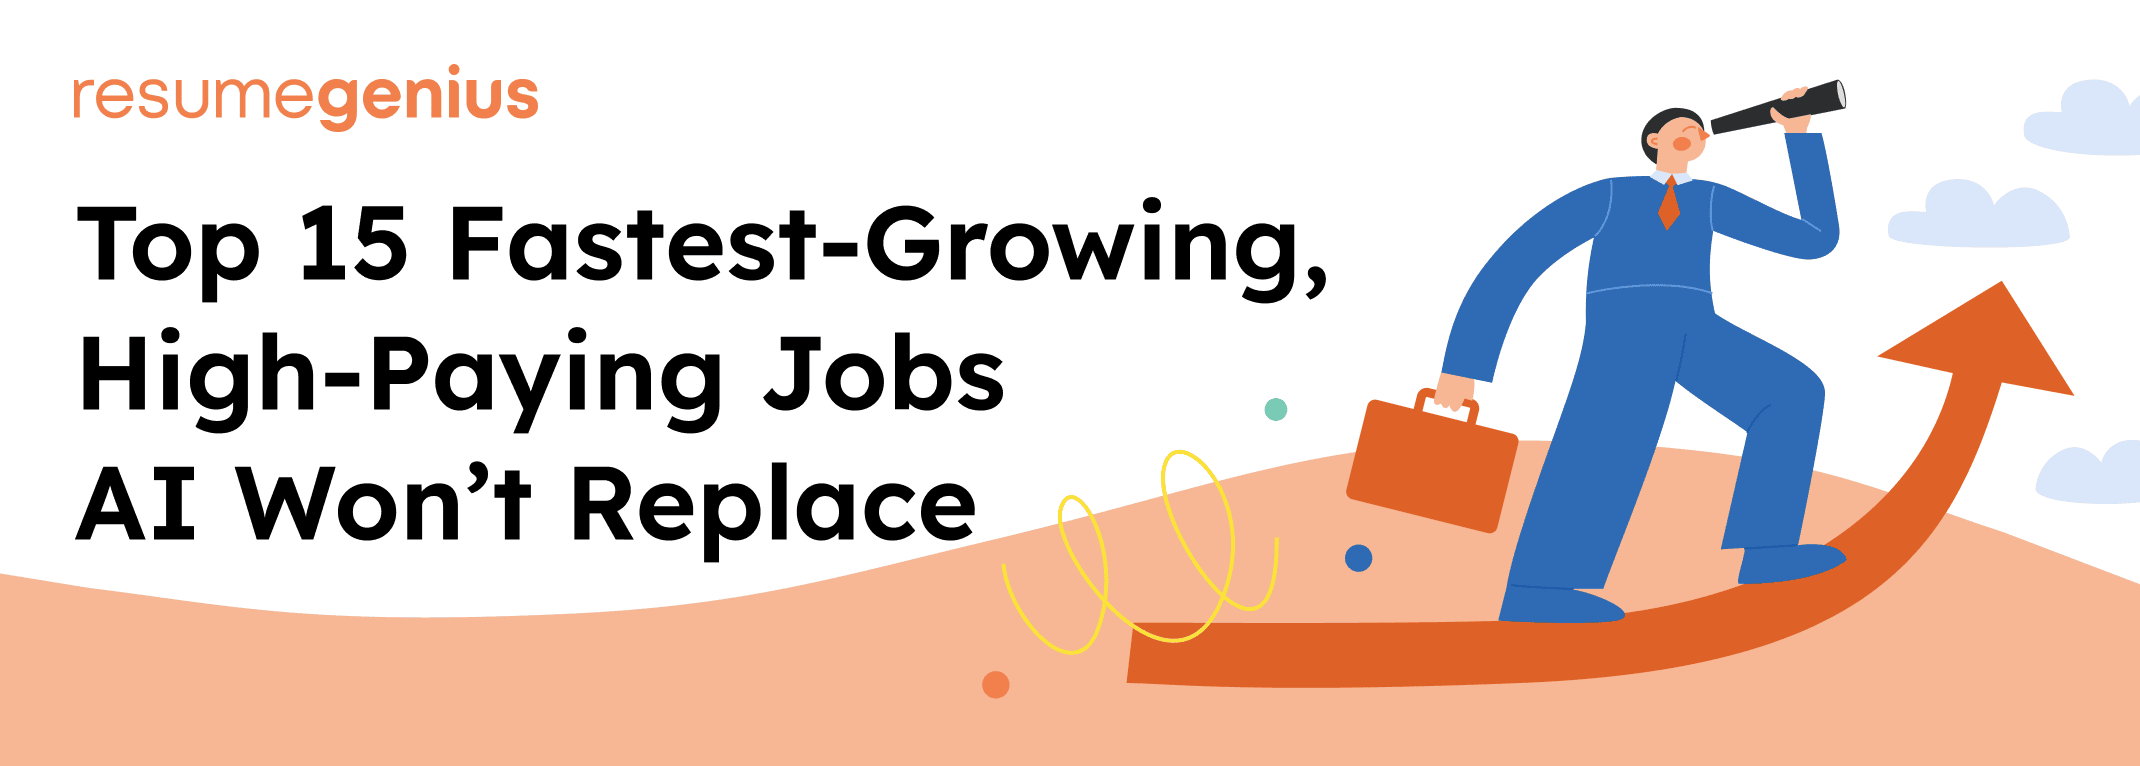 Graphic presenting the article title "Top 30 Fastest-Growing, High-Paying Jobs: 2023 Ranking" that features a man standing atop an upward-trending arrow and looking through a telescope (into the future).